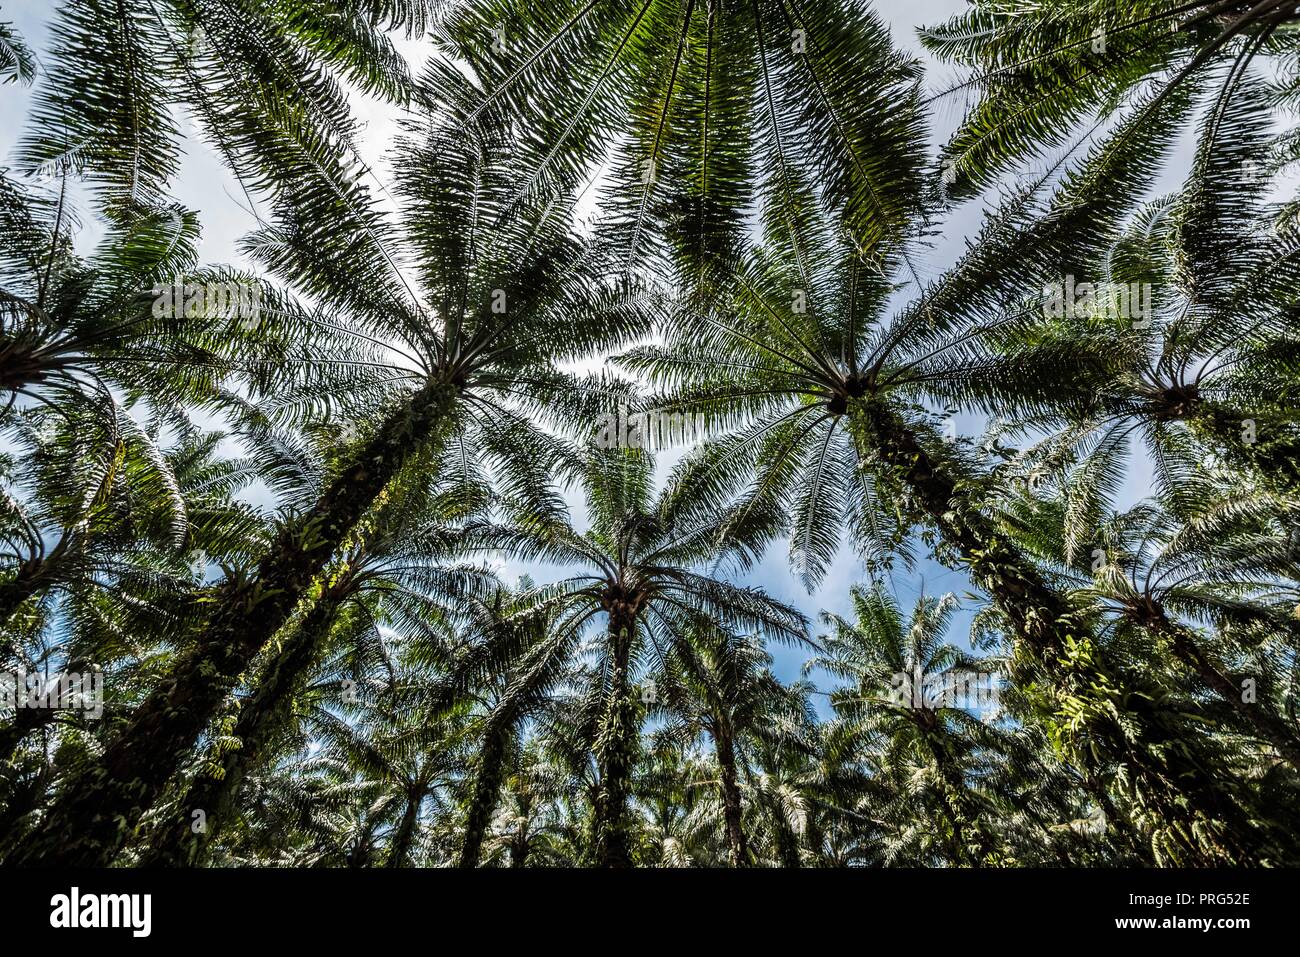 A canopy of oil palm at a plantation plot in Perak, Malaysia Stock Photo